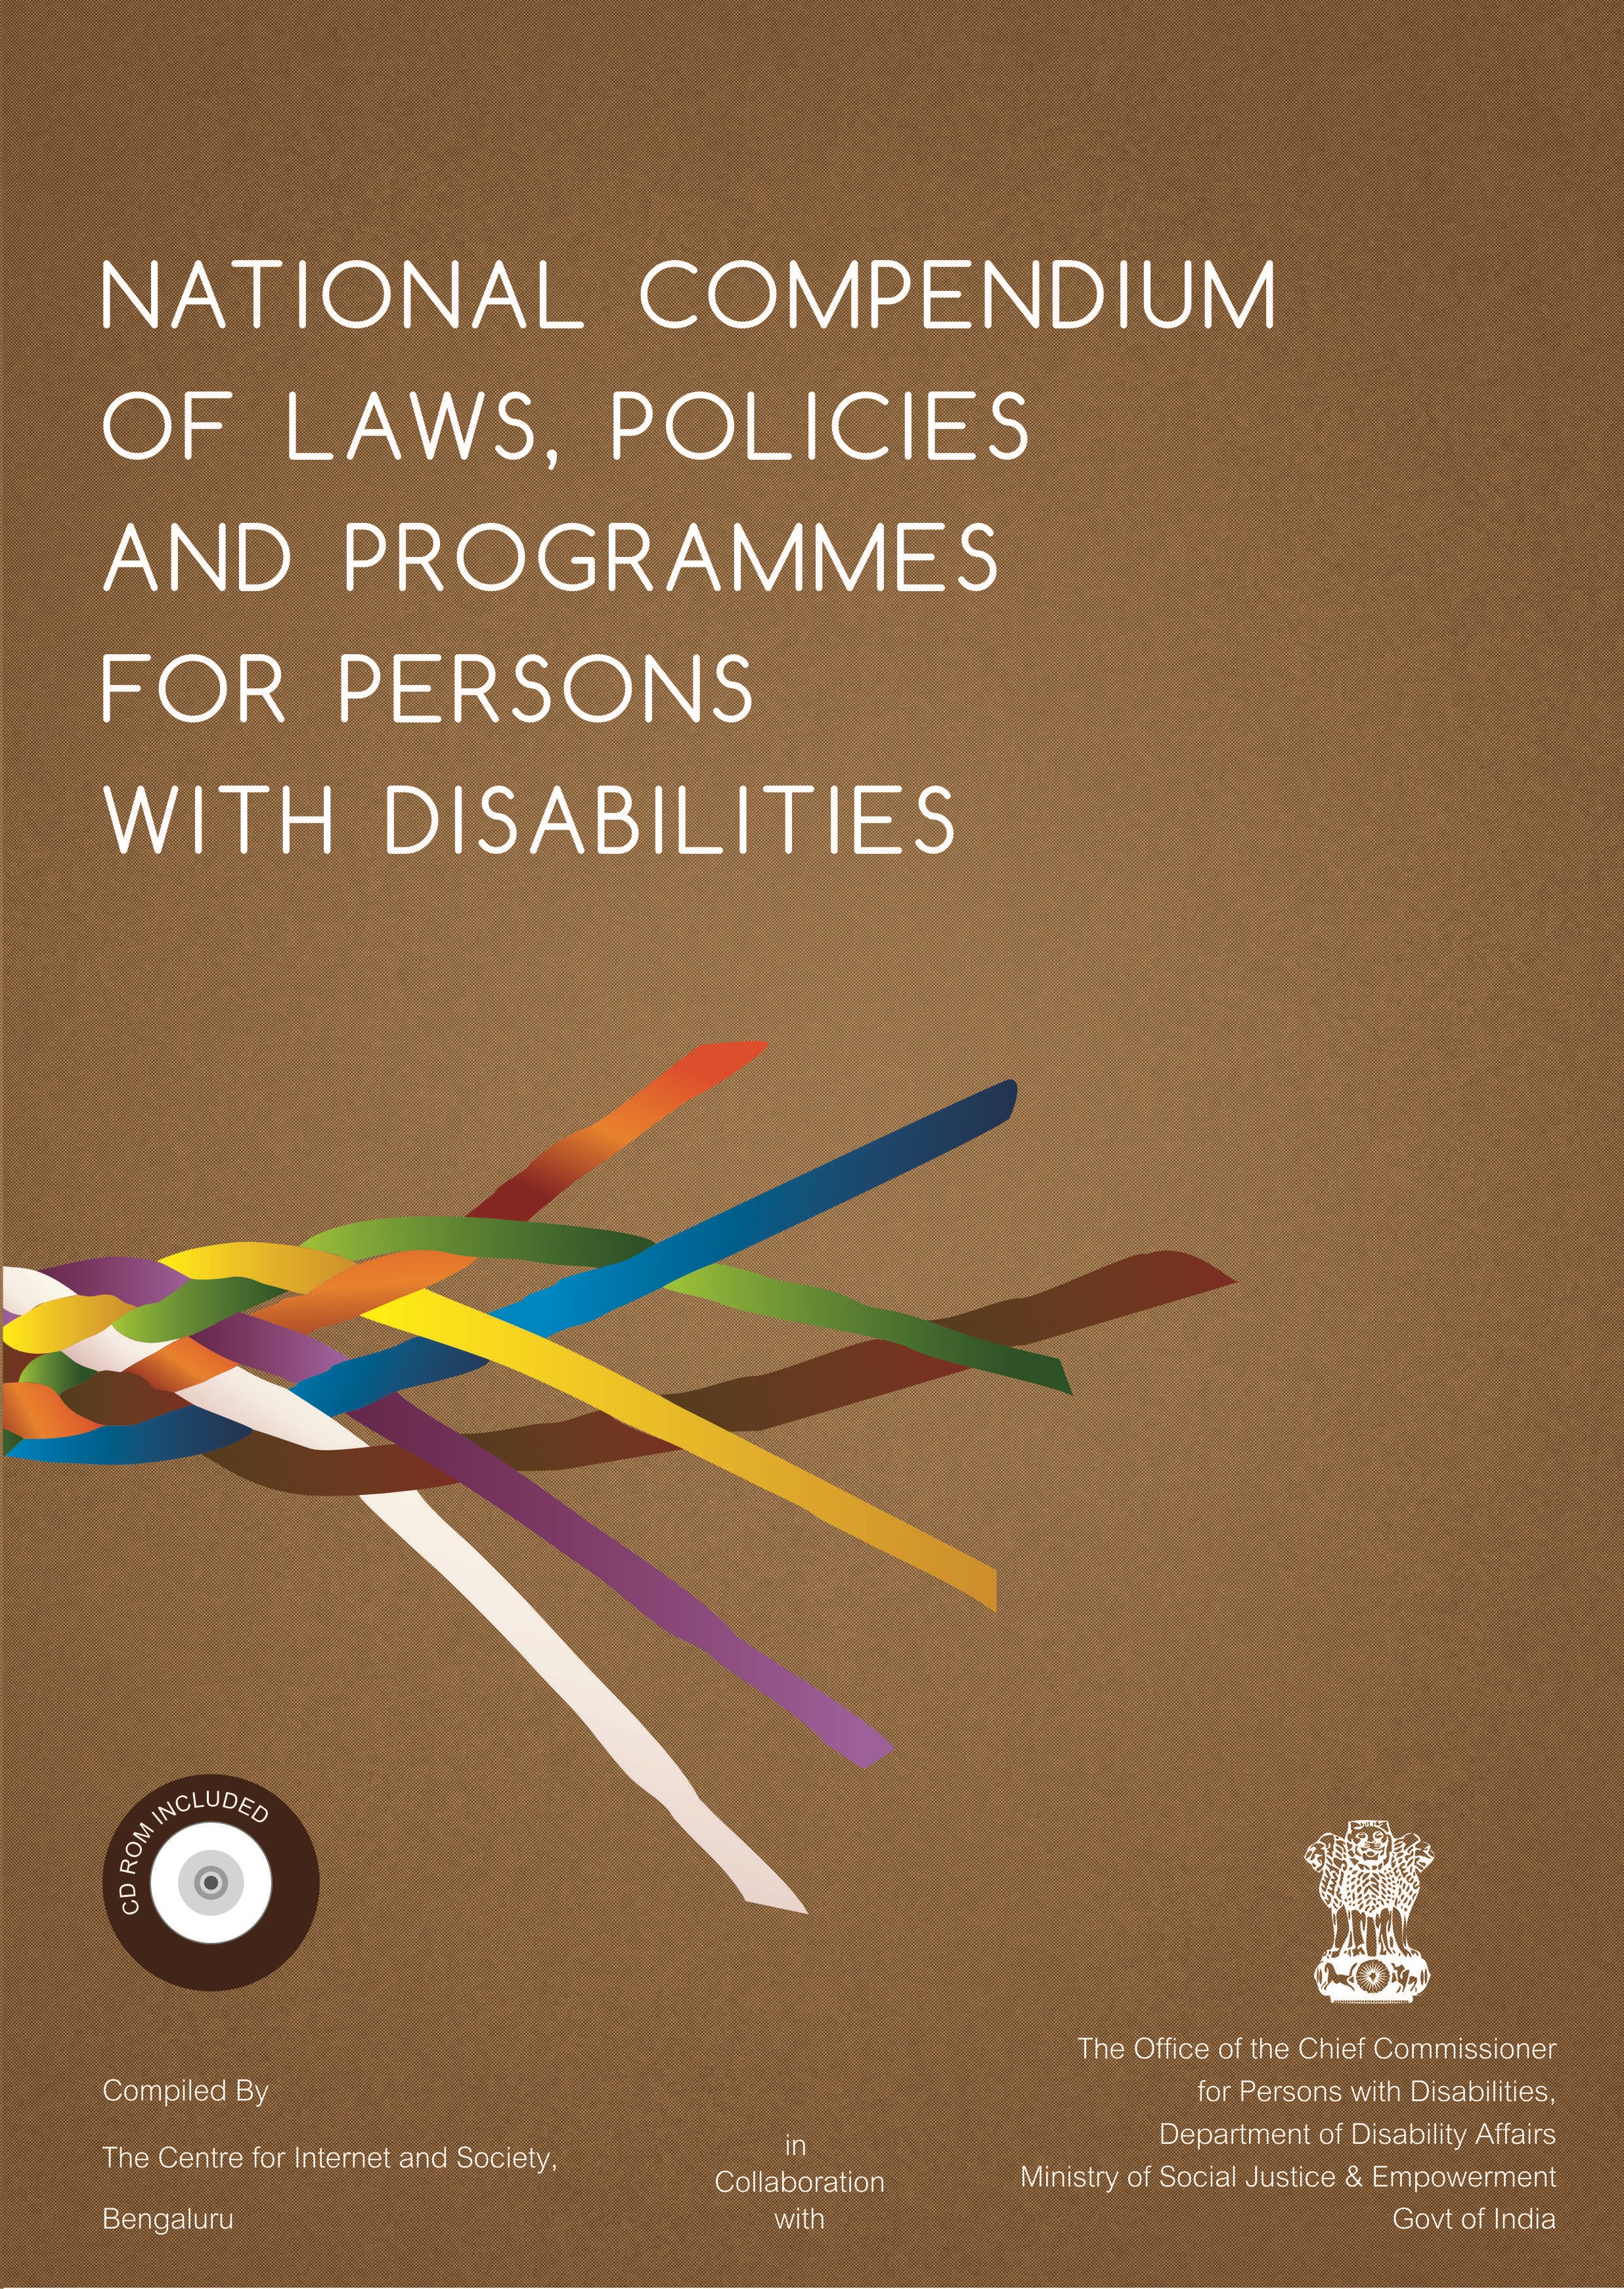 National Compendium of Laws, Policies, Programmes for Persons with Disabilities